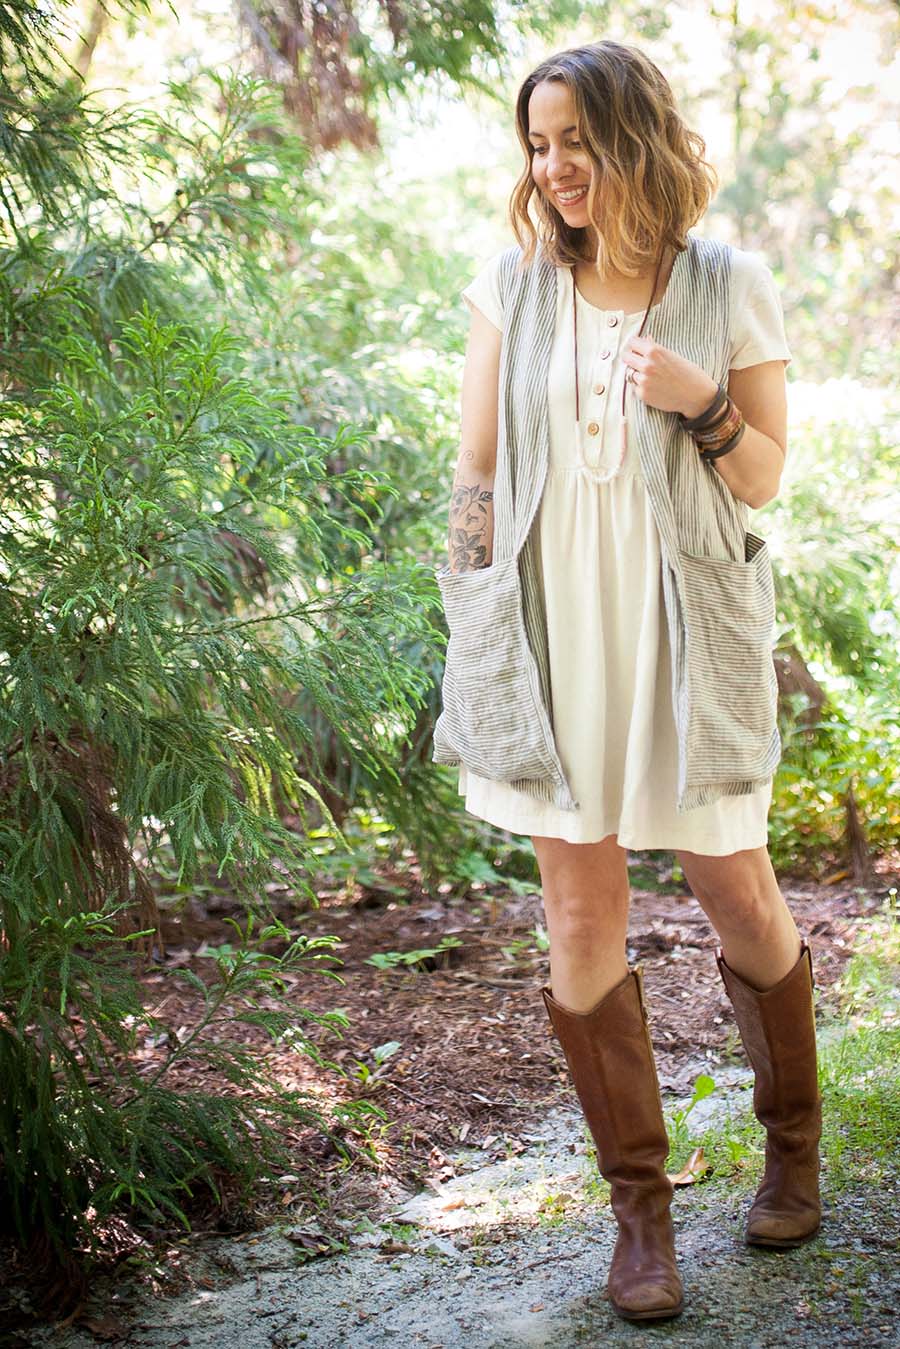 Meg wears a striped Forager Vest over a white Hinterland Dress